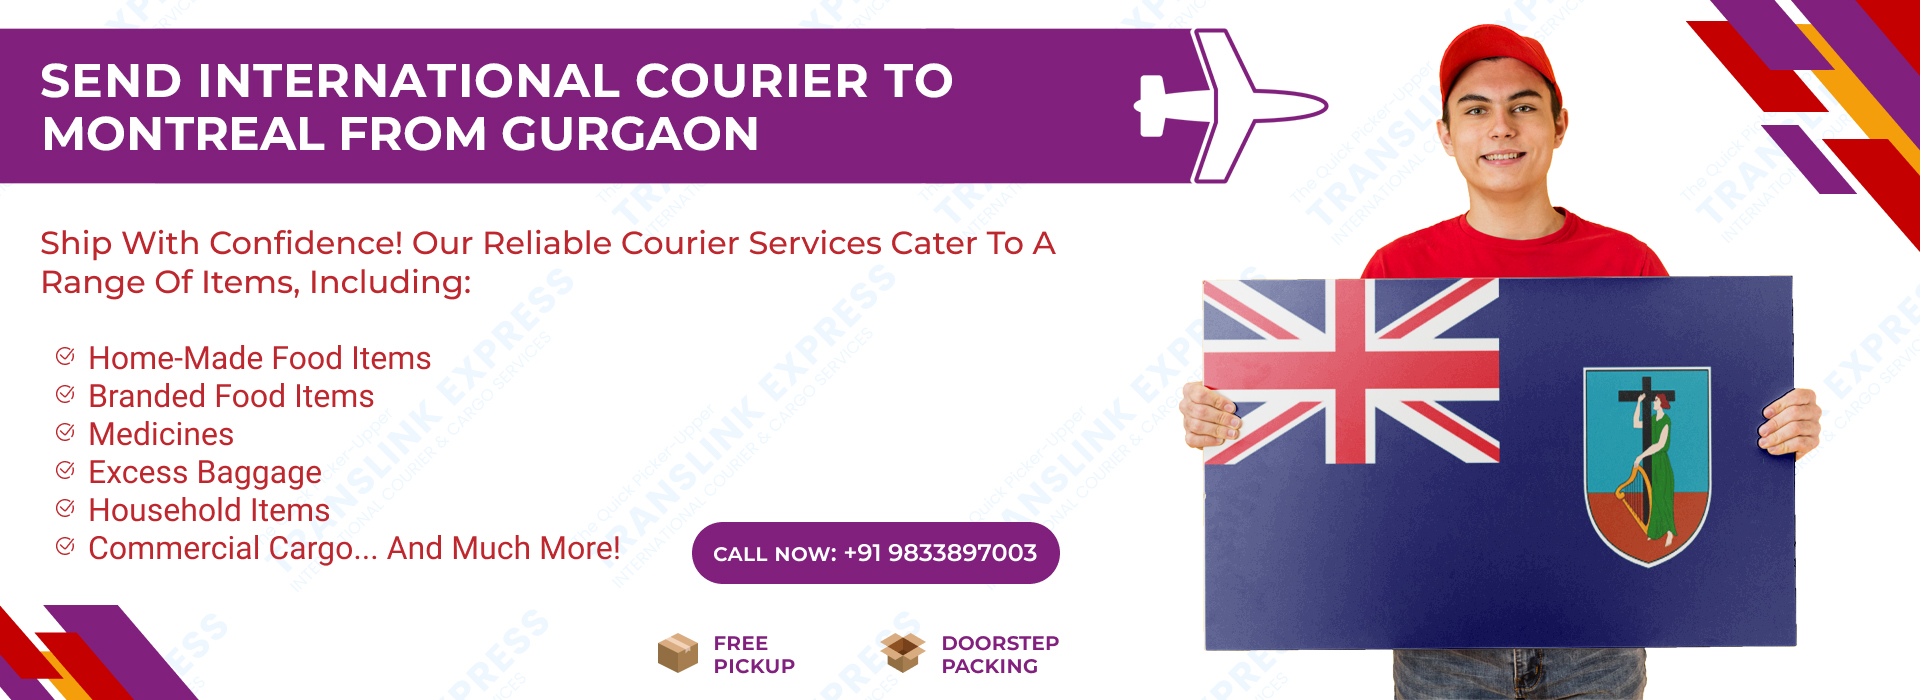 Courier to Montreal From Gurgaon